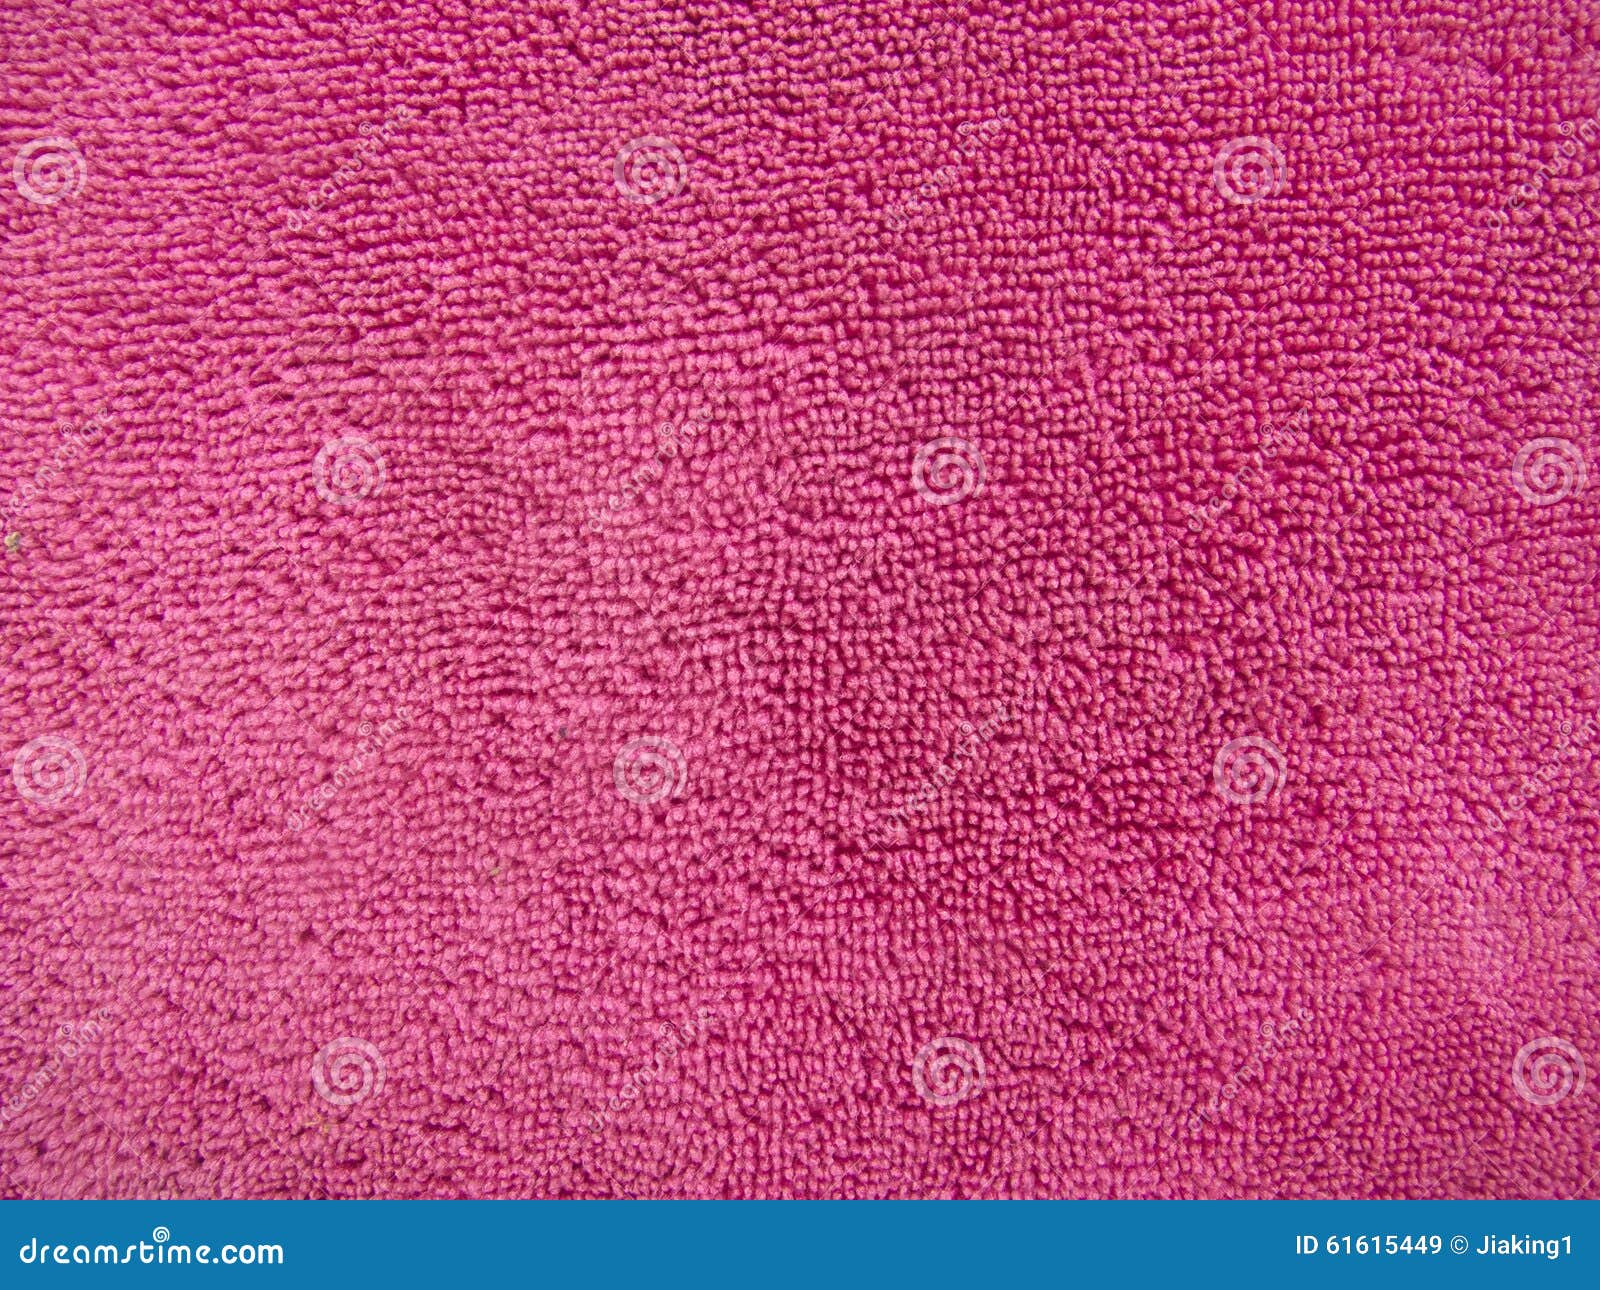 pink towel texture, cloth background